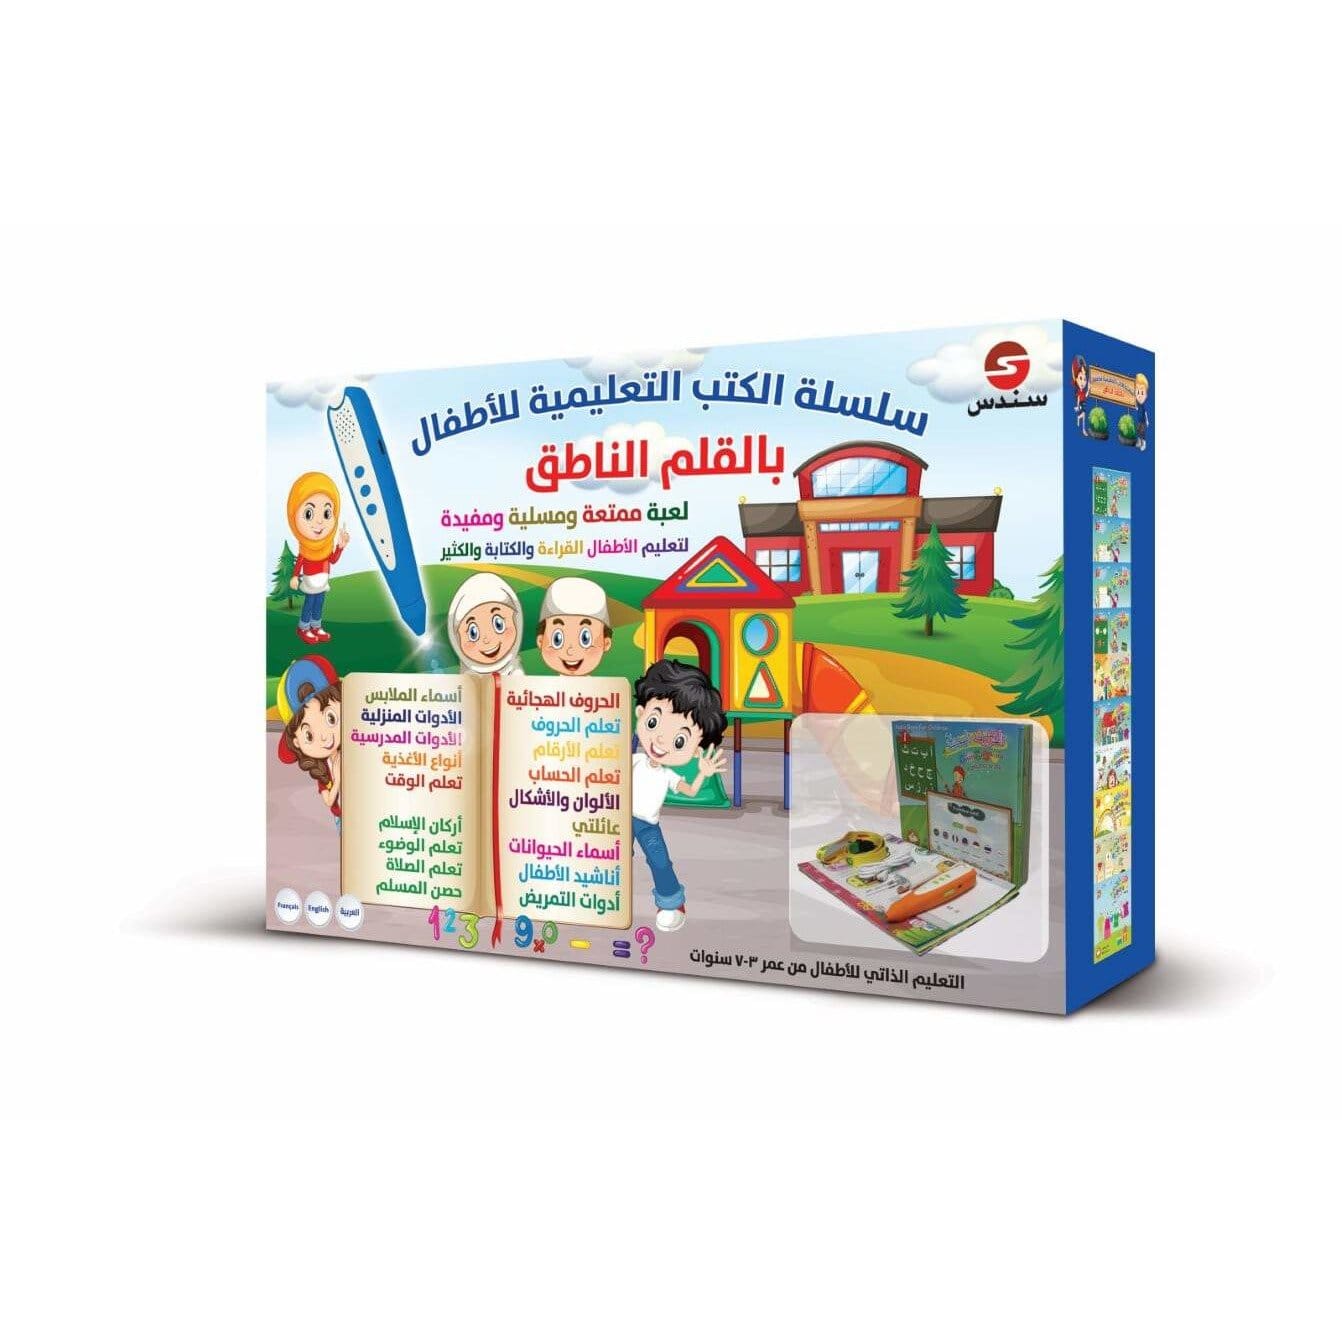 Educational books series with speaking pen